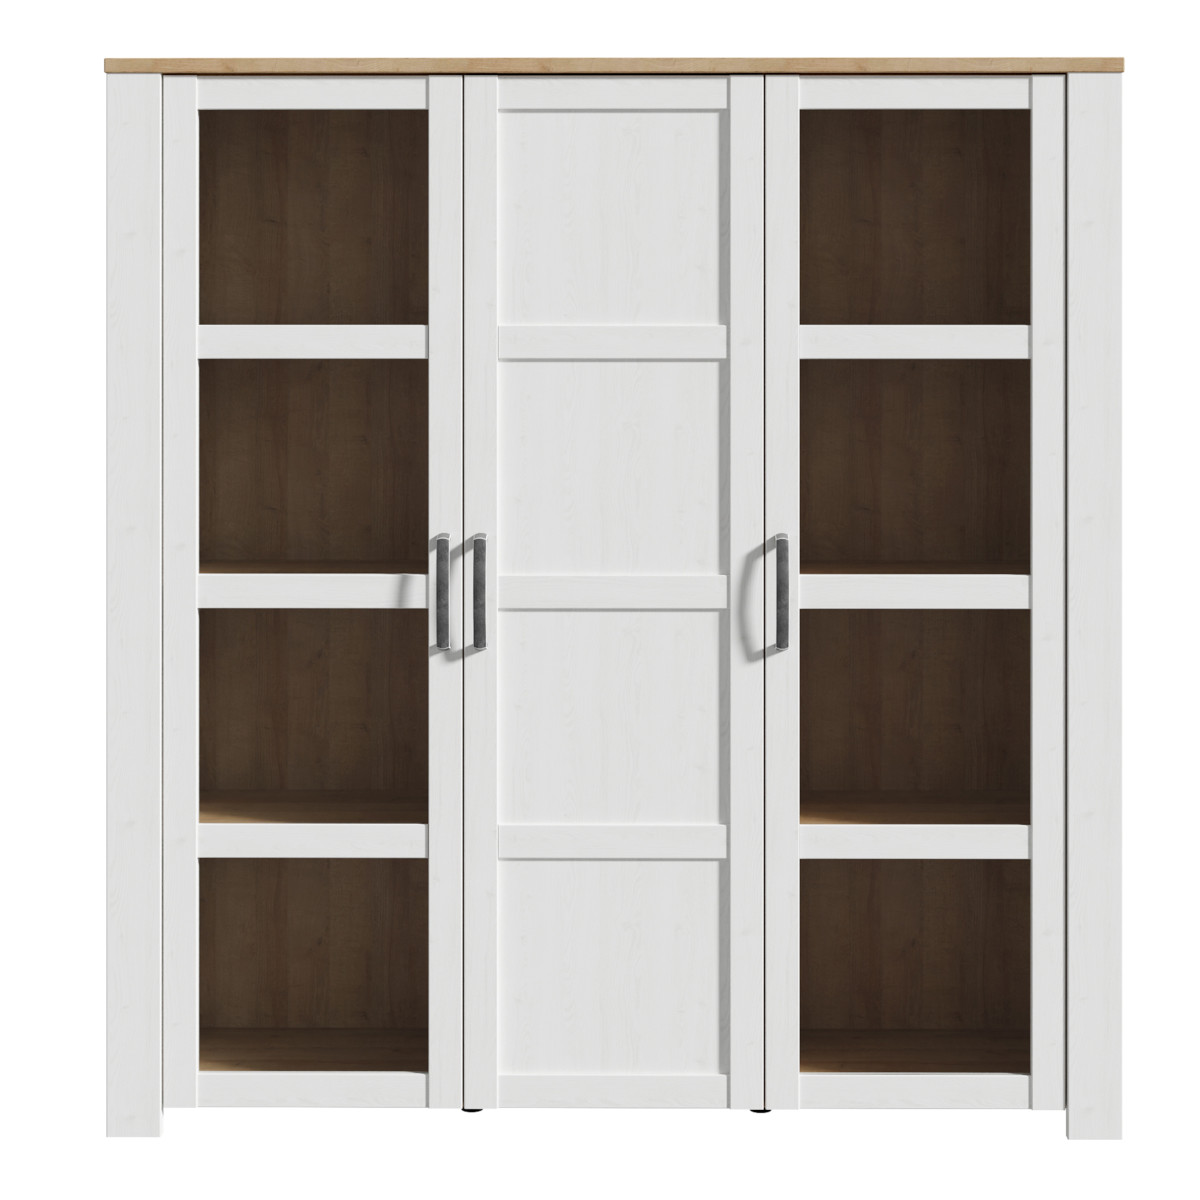 Bohol Large Display Cabinet in Riviera Oak and White